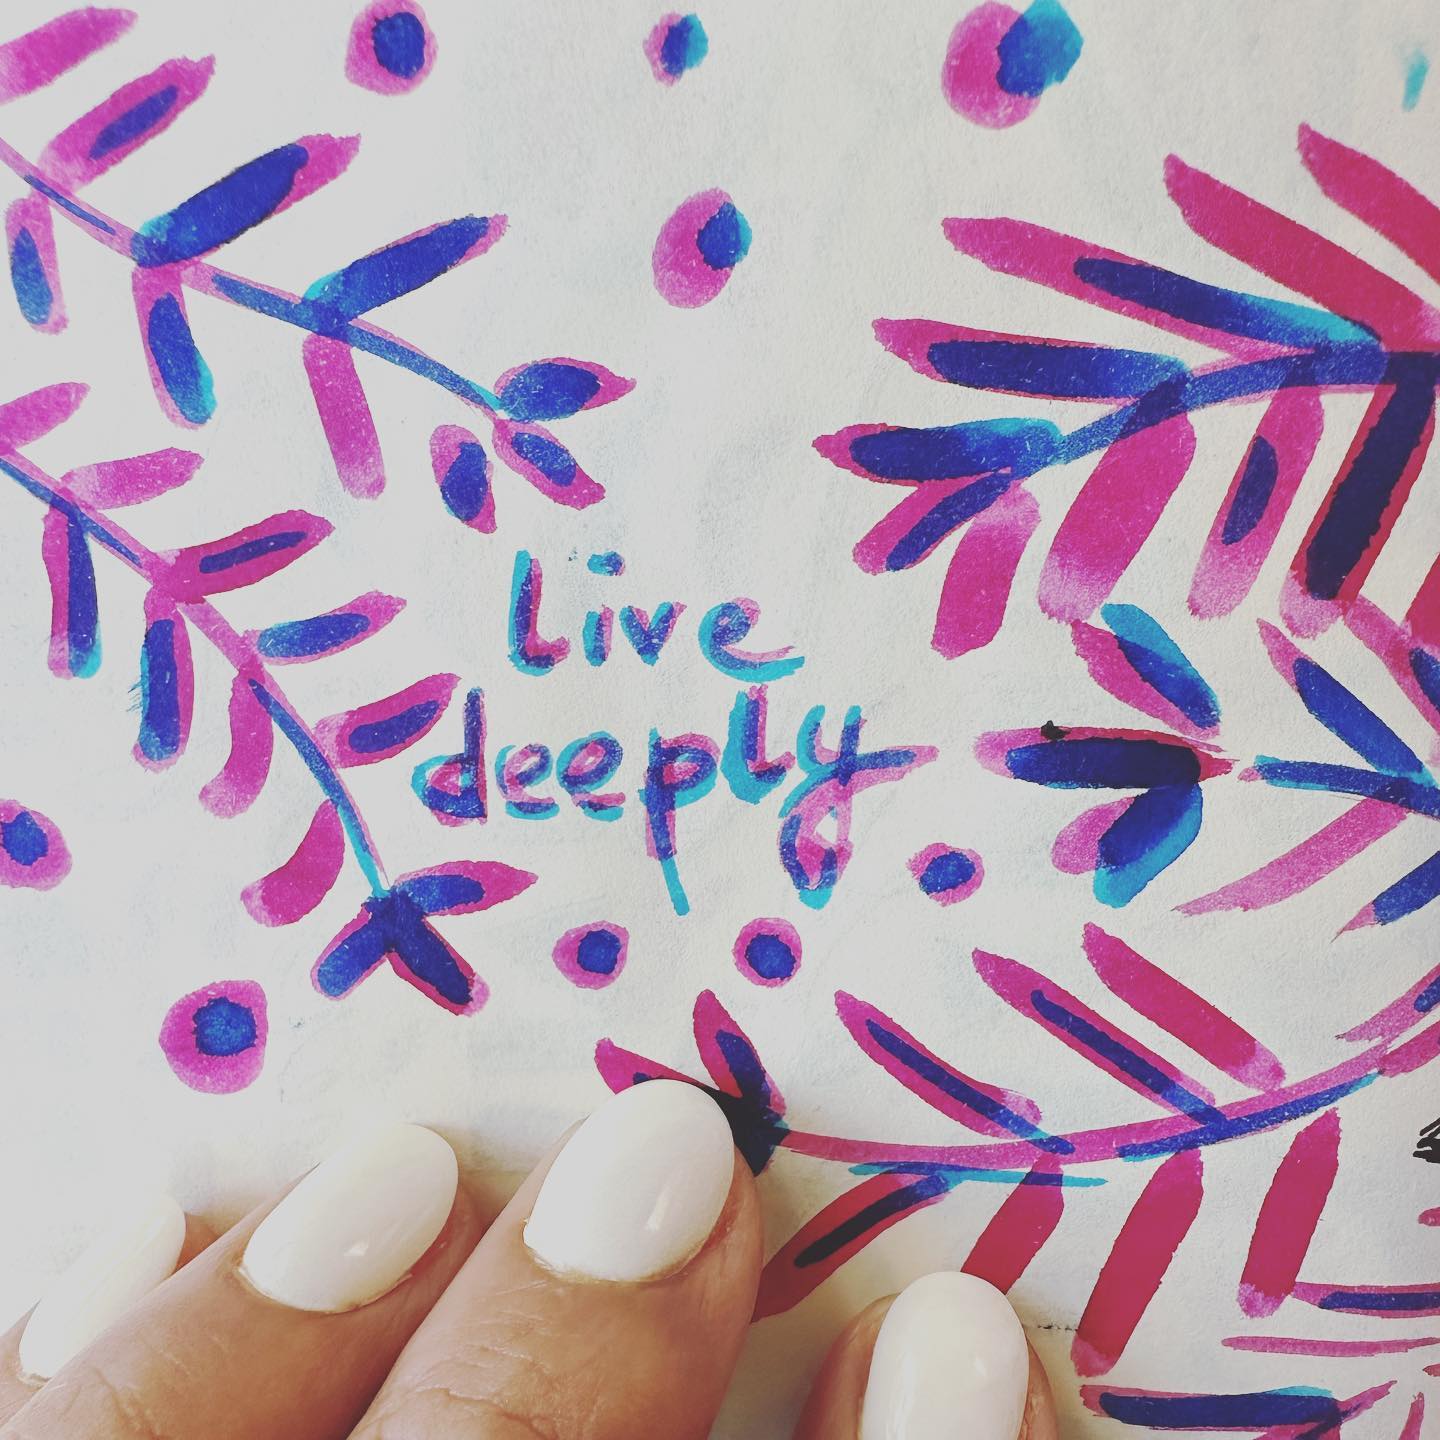 What does it mean to live deeply? Does it mean to live it fully, with intent and awareness?